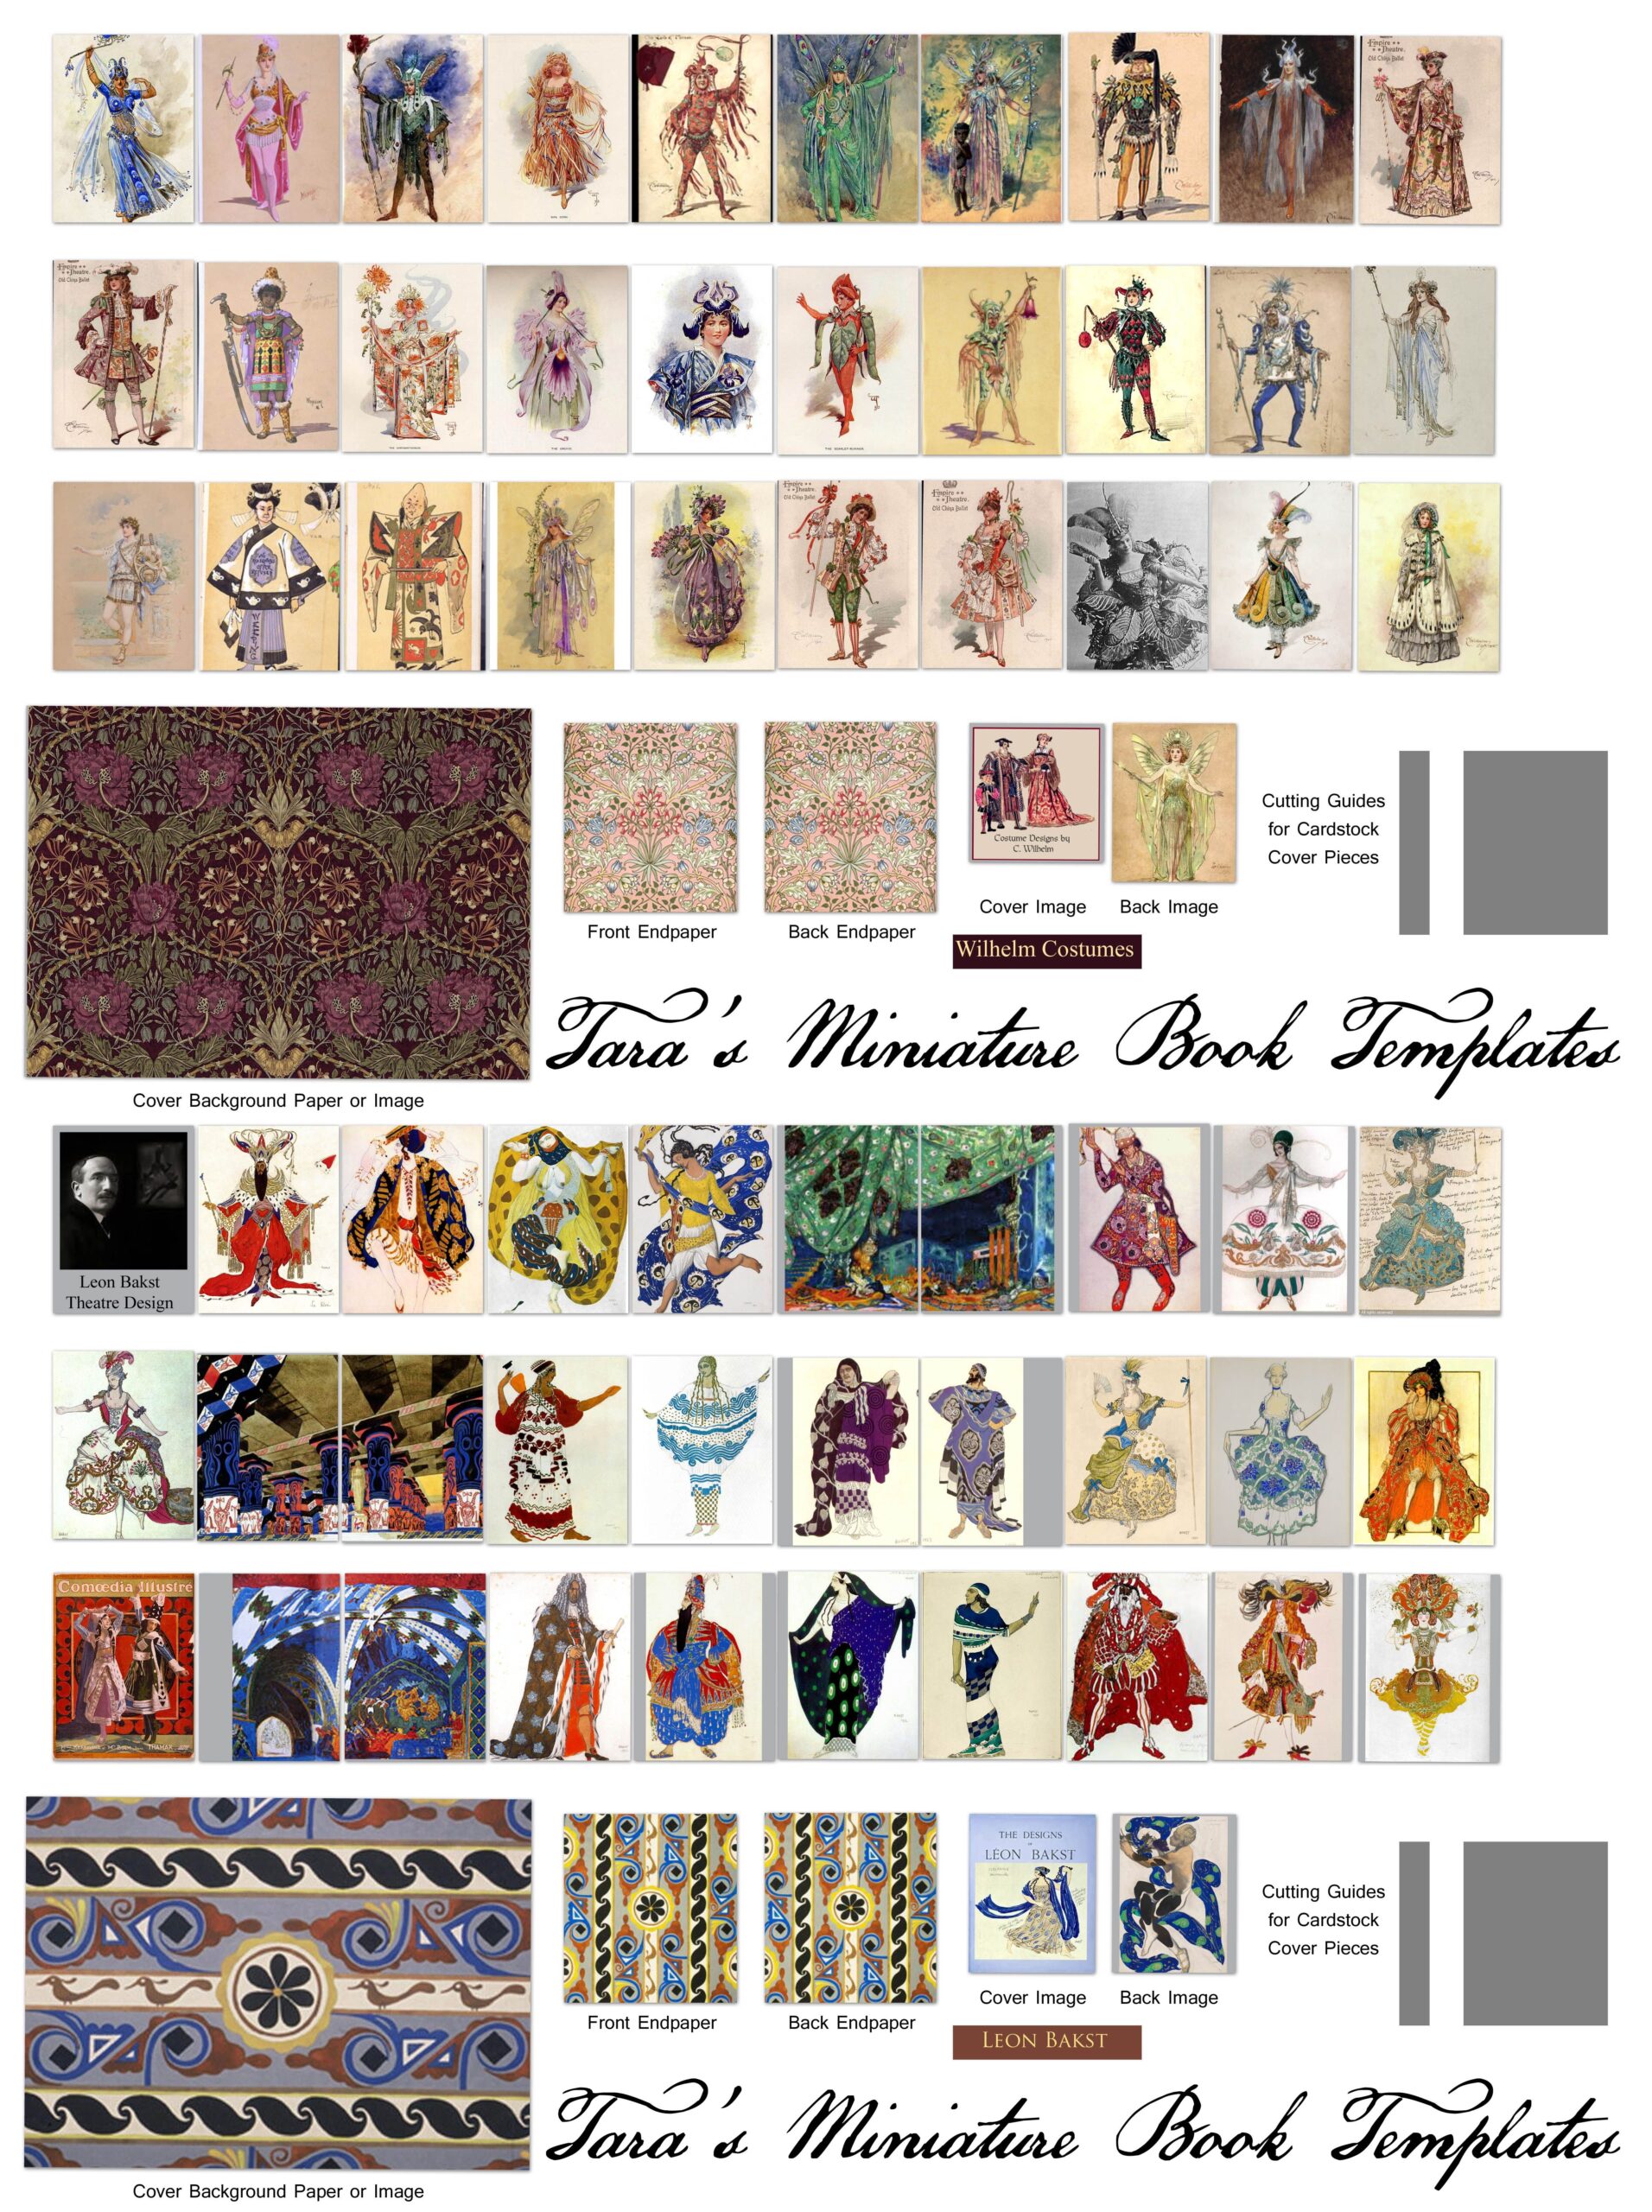 My Combined Free Mini Book Template With The 1 1 2 Size Versions Of The New Mini Costume Books Of Costume Des Miniature Books Miniature Printables Miniatures